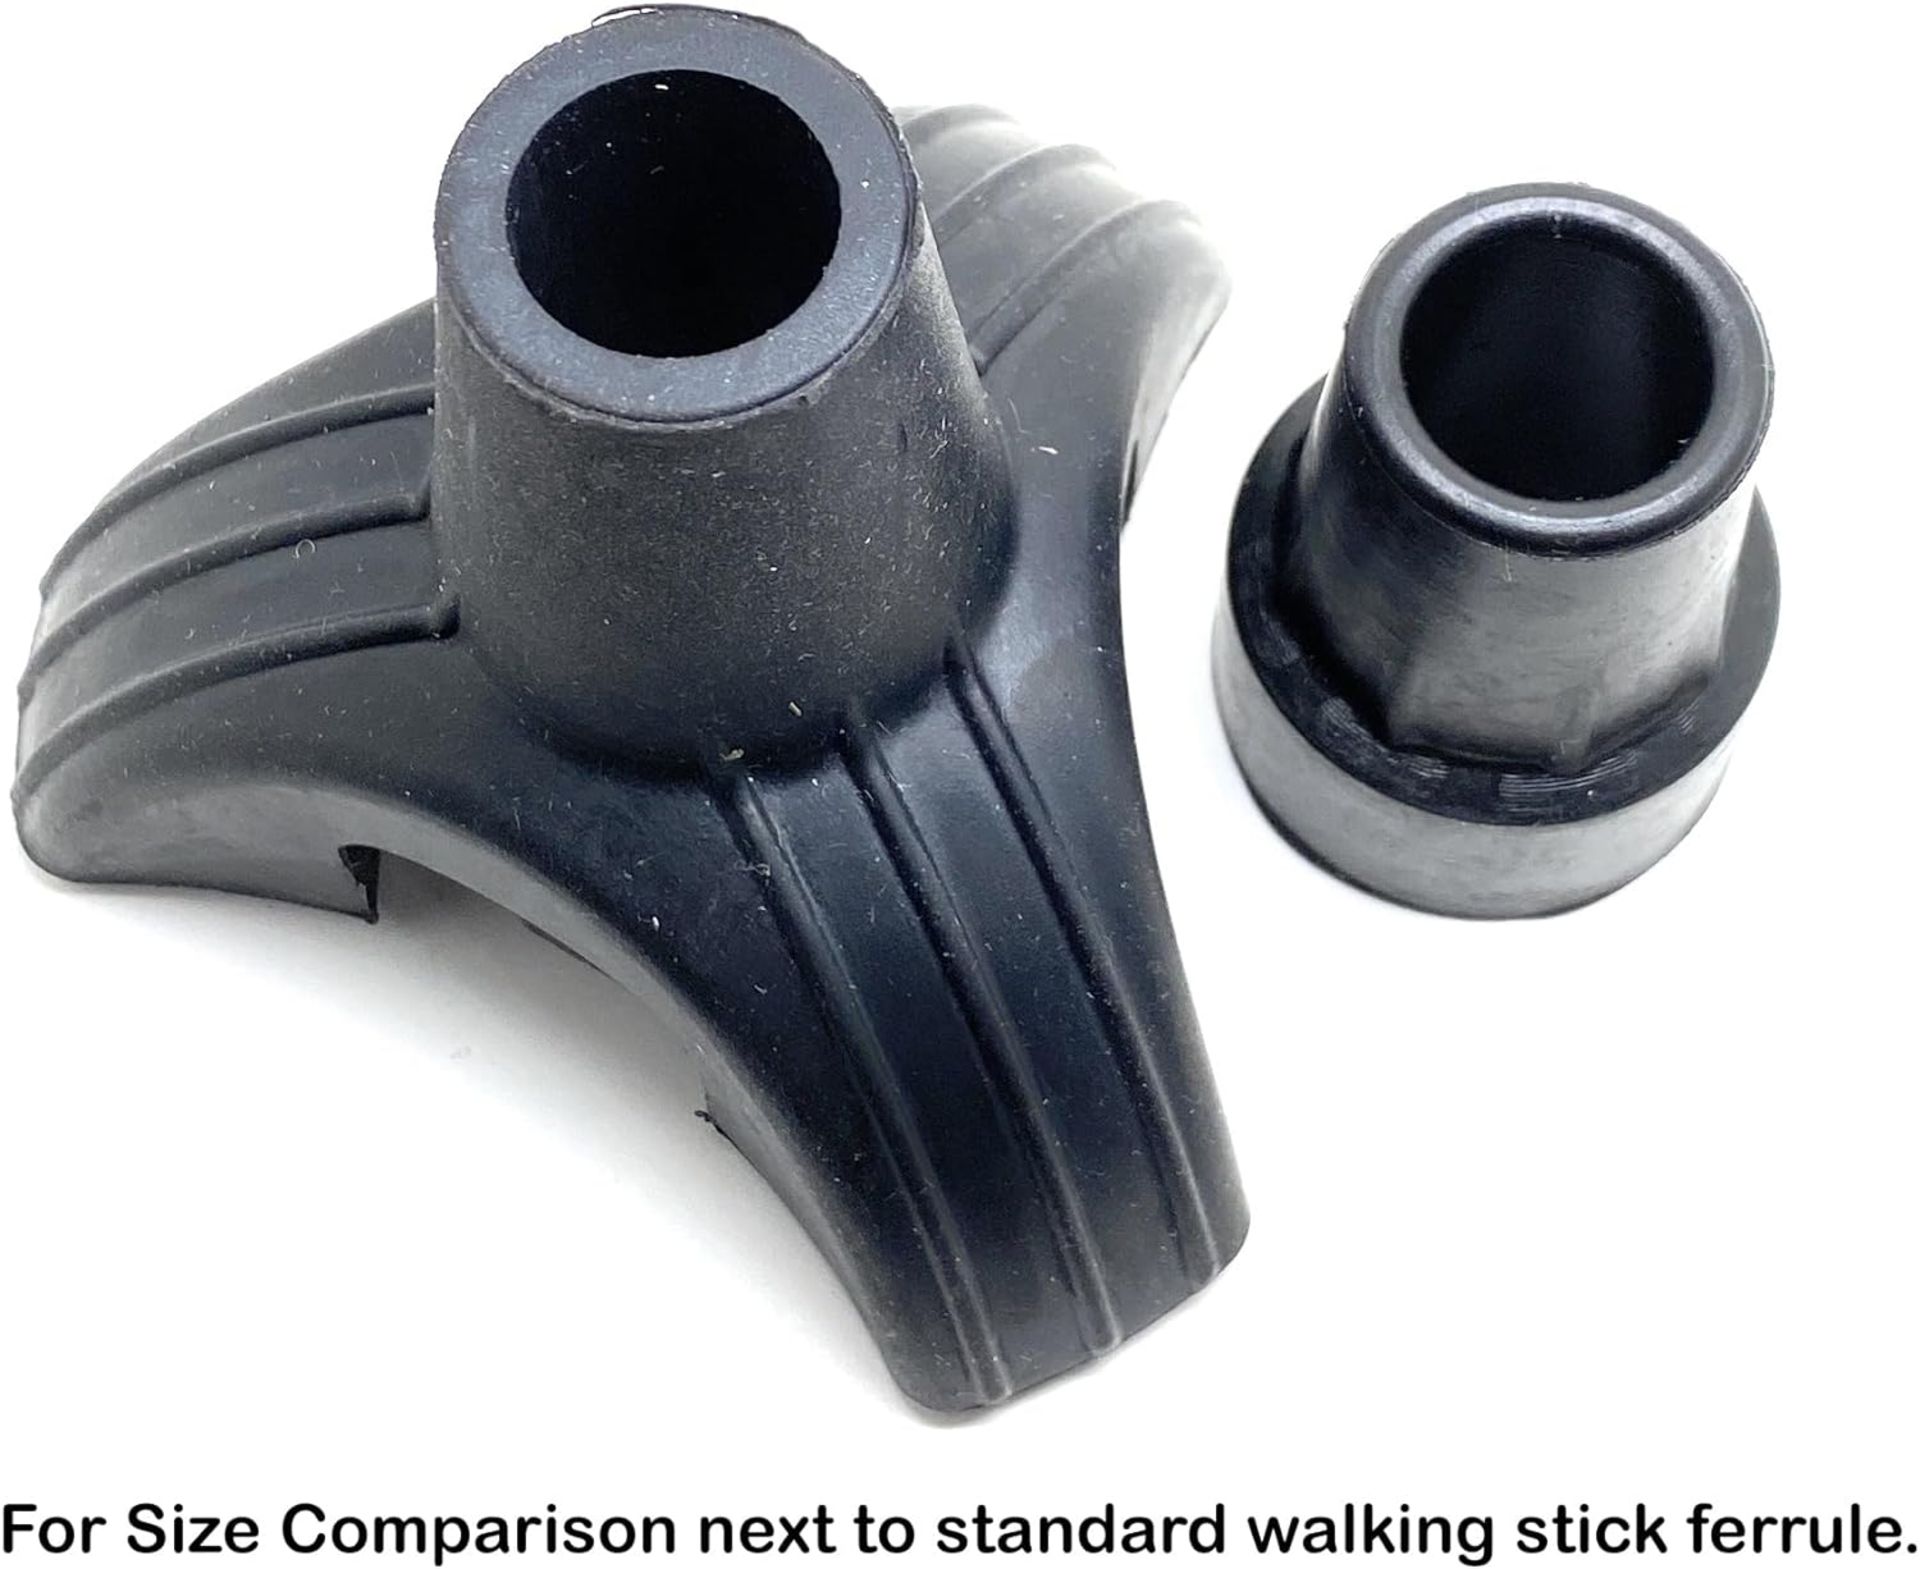 1500 X NEW WALKING STICK STABILITY TIP - BLACK - Image 2 of 3